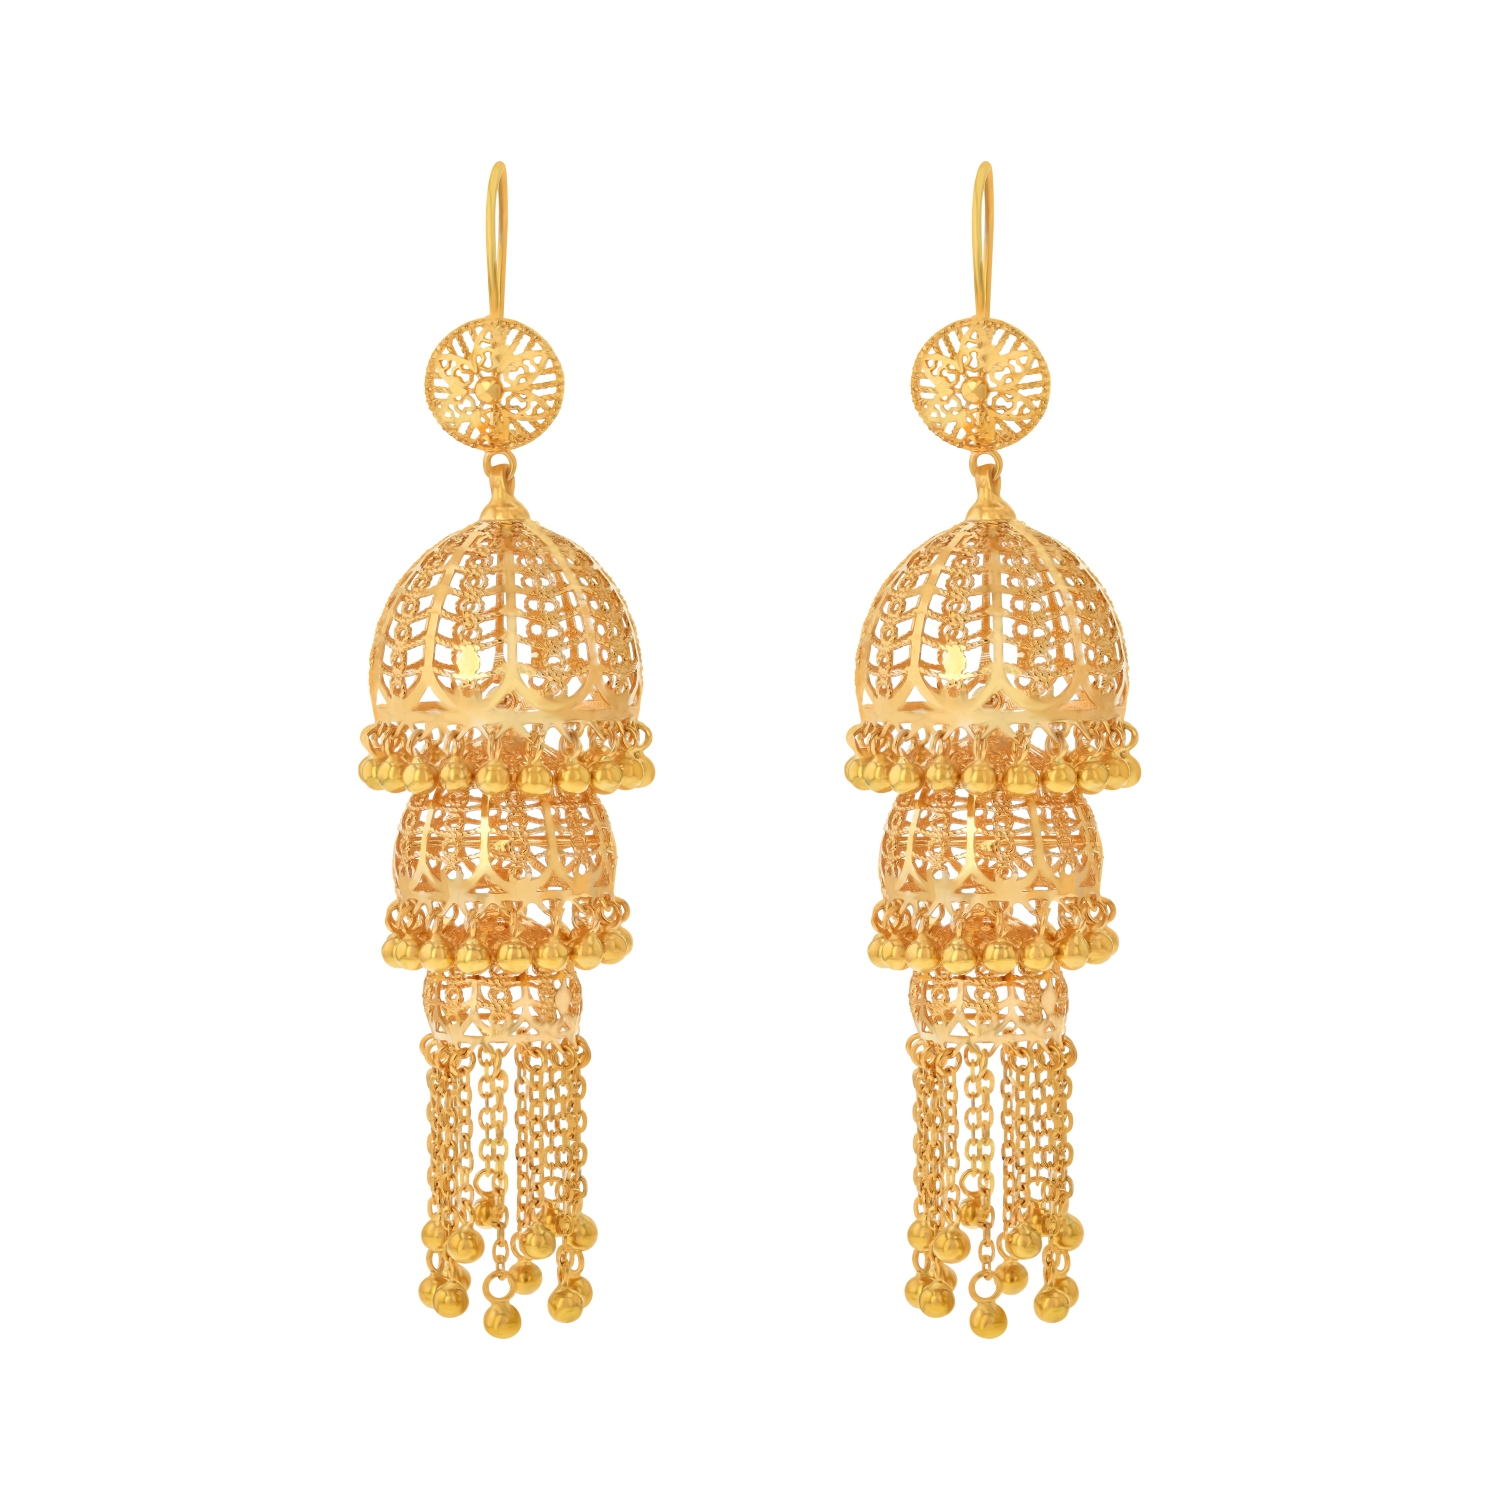 21K Traditional Gold Earring